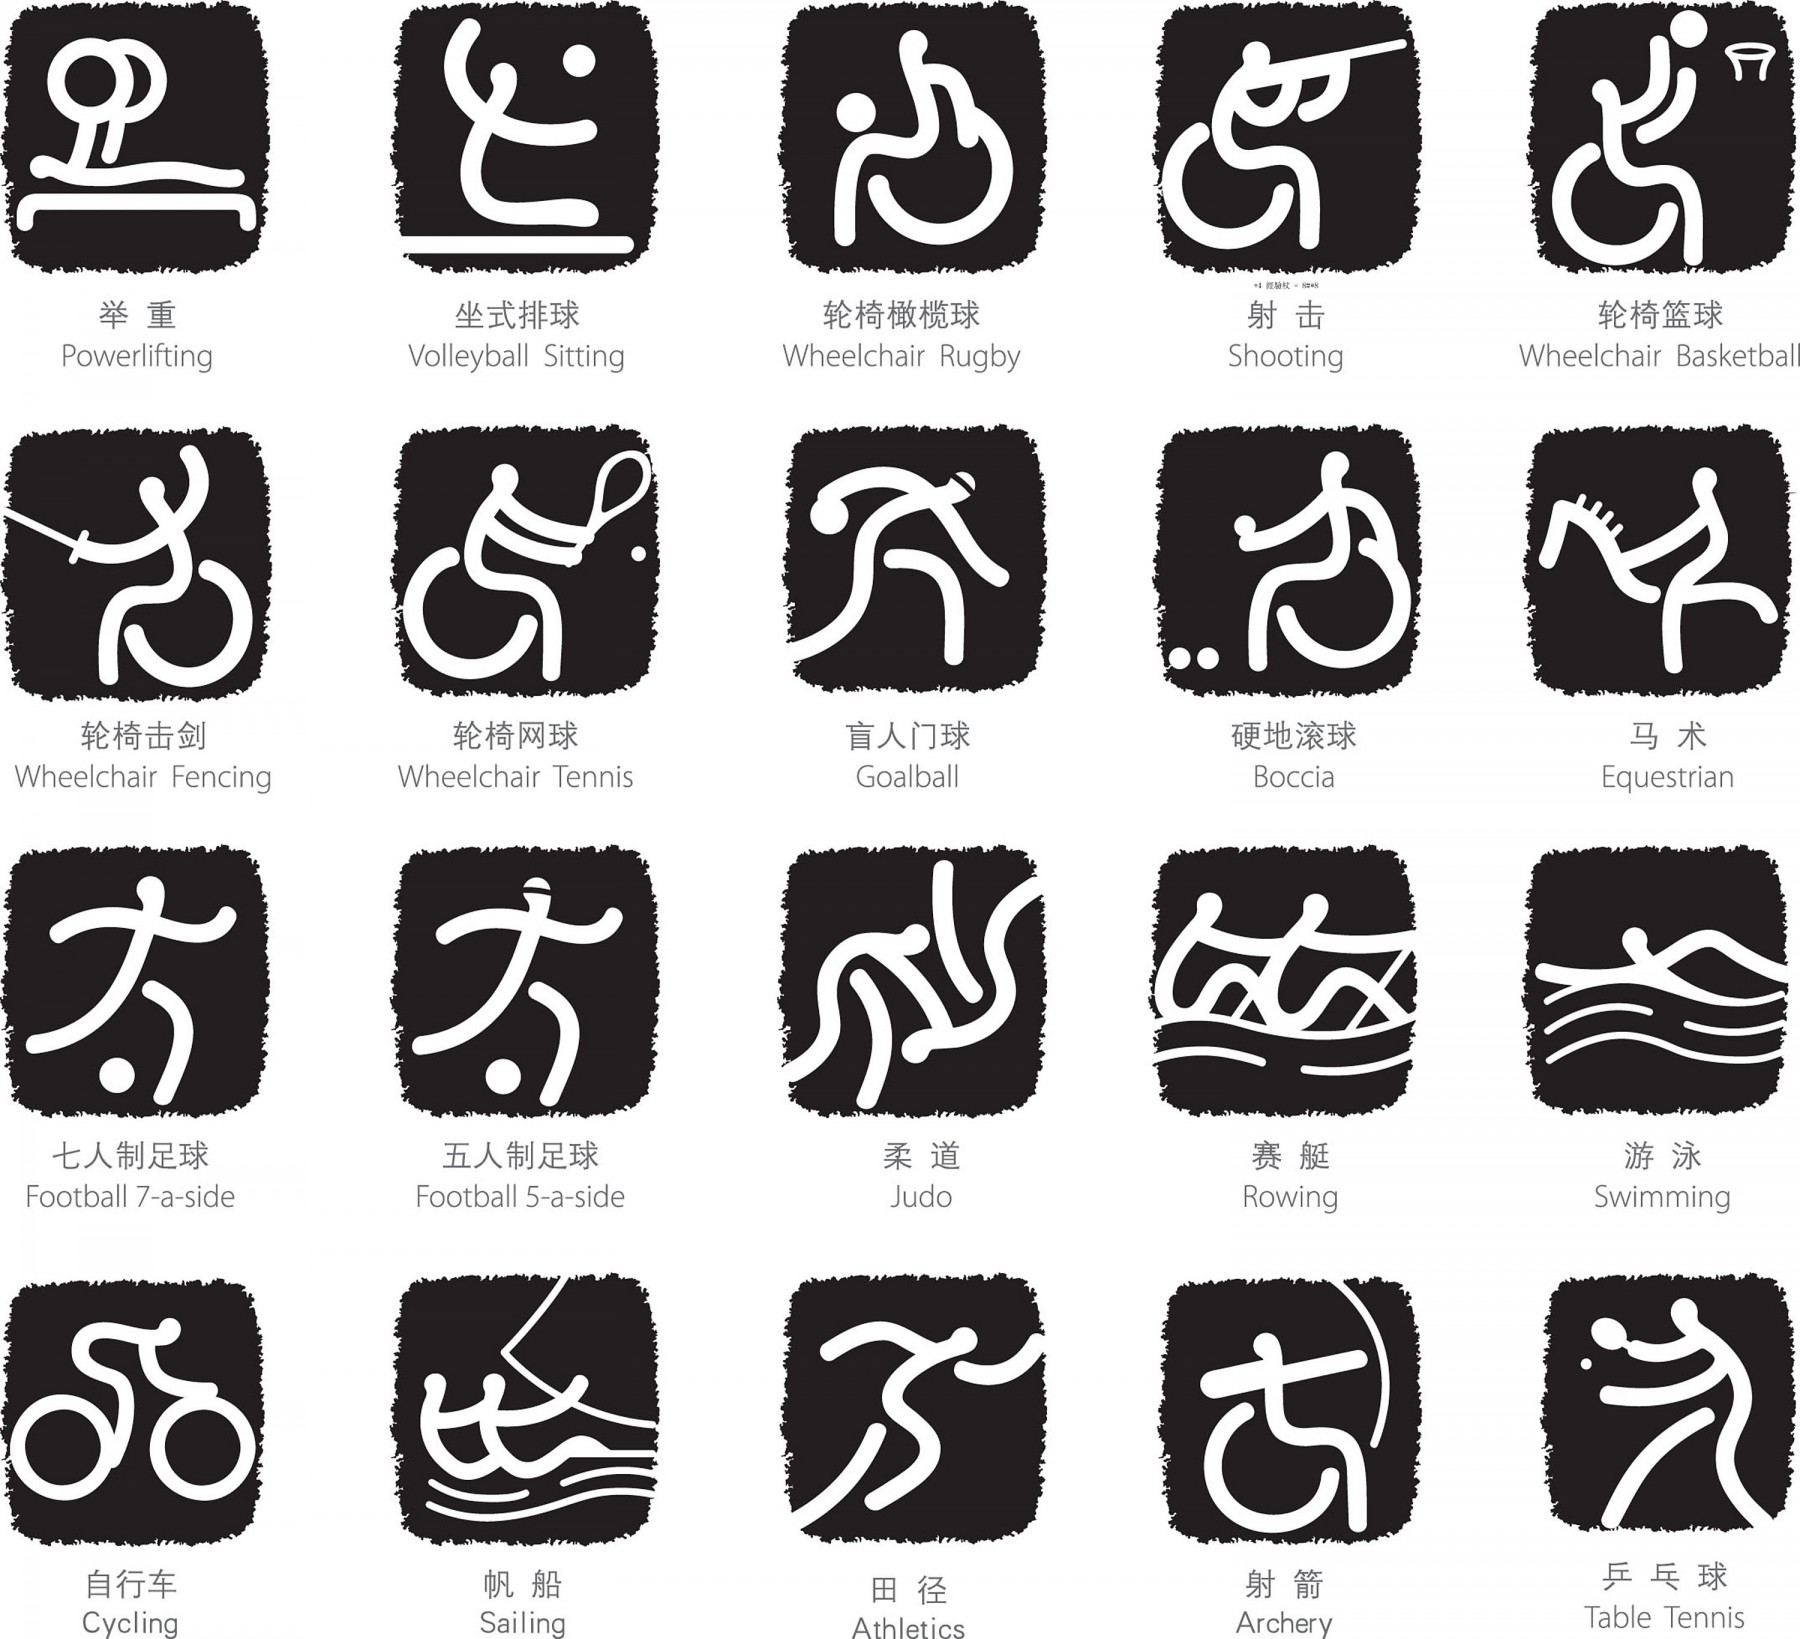 2008 Paralympic Games Pictograms